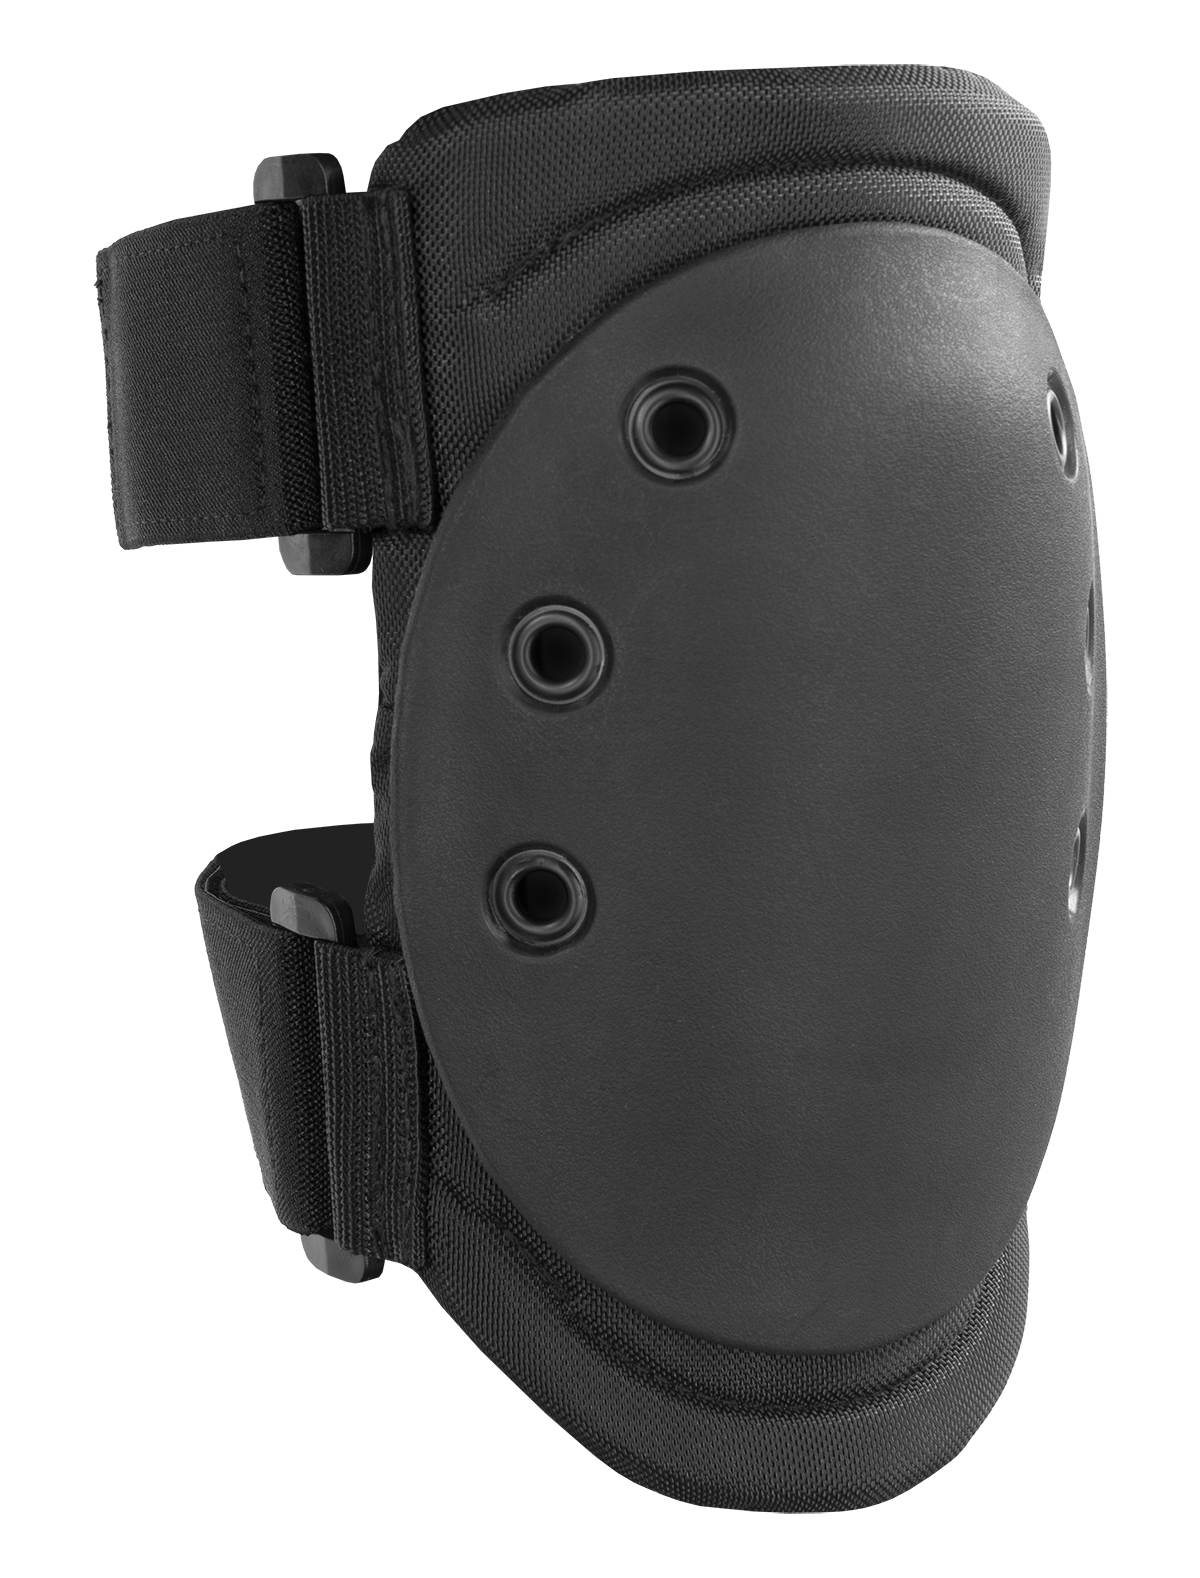 Imperial Hard Shell Cap Knee Pads